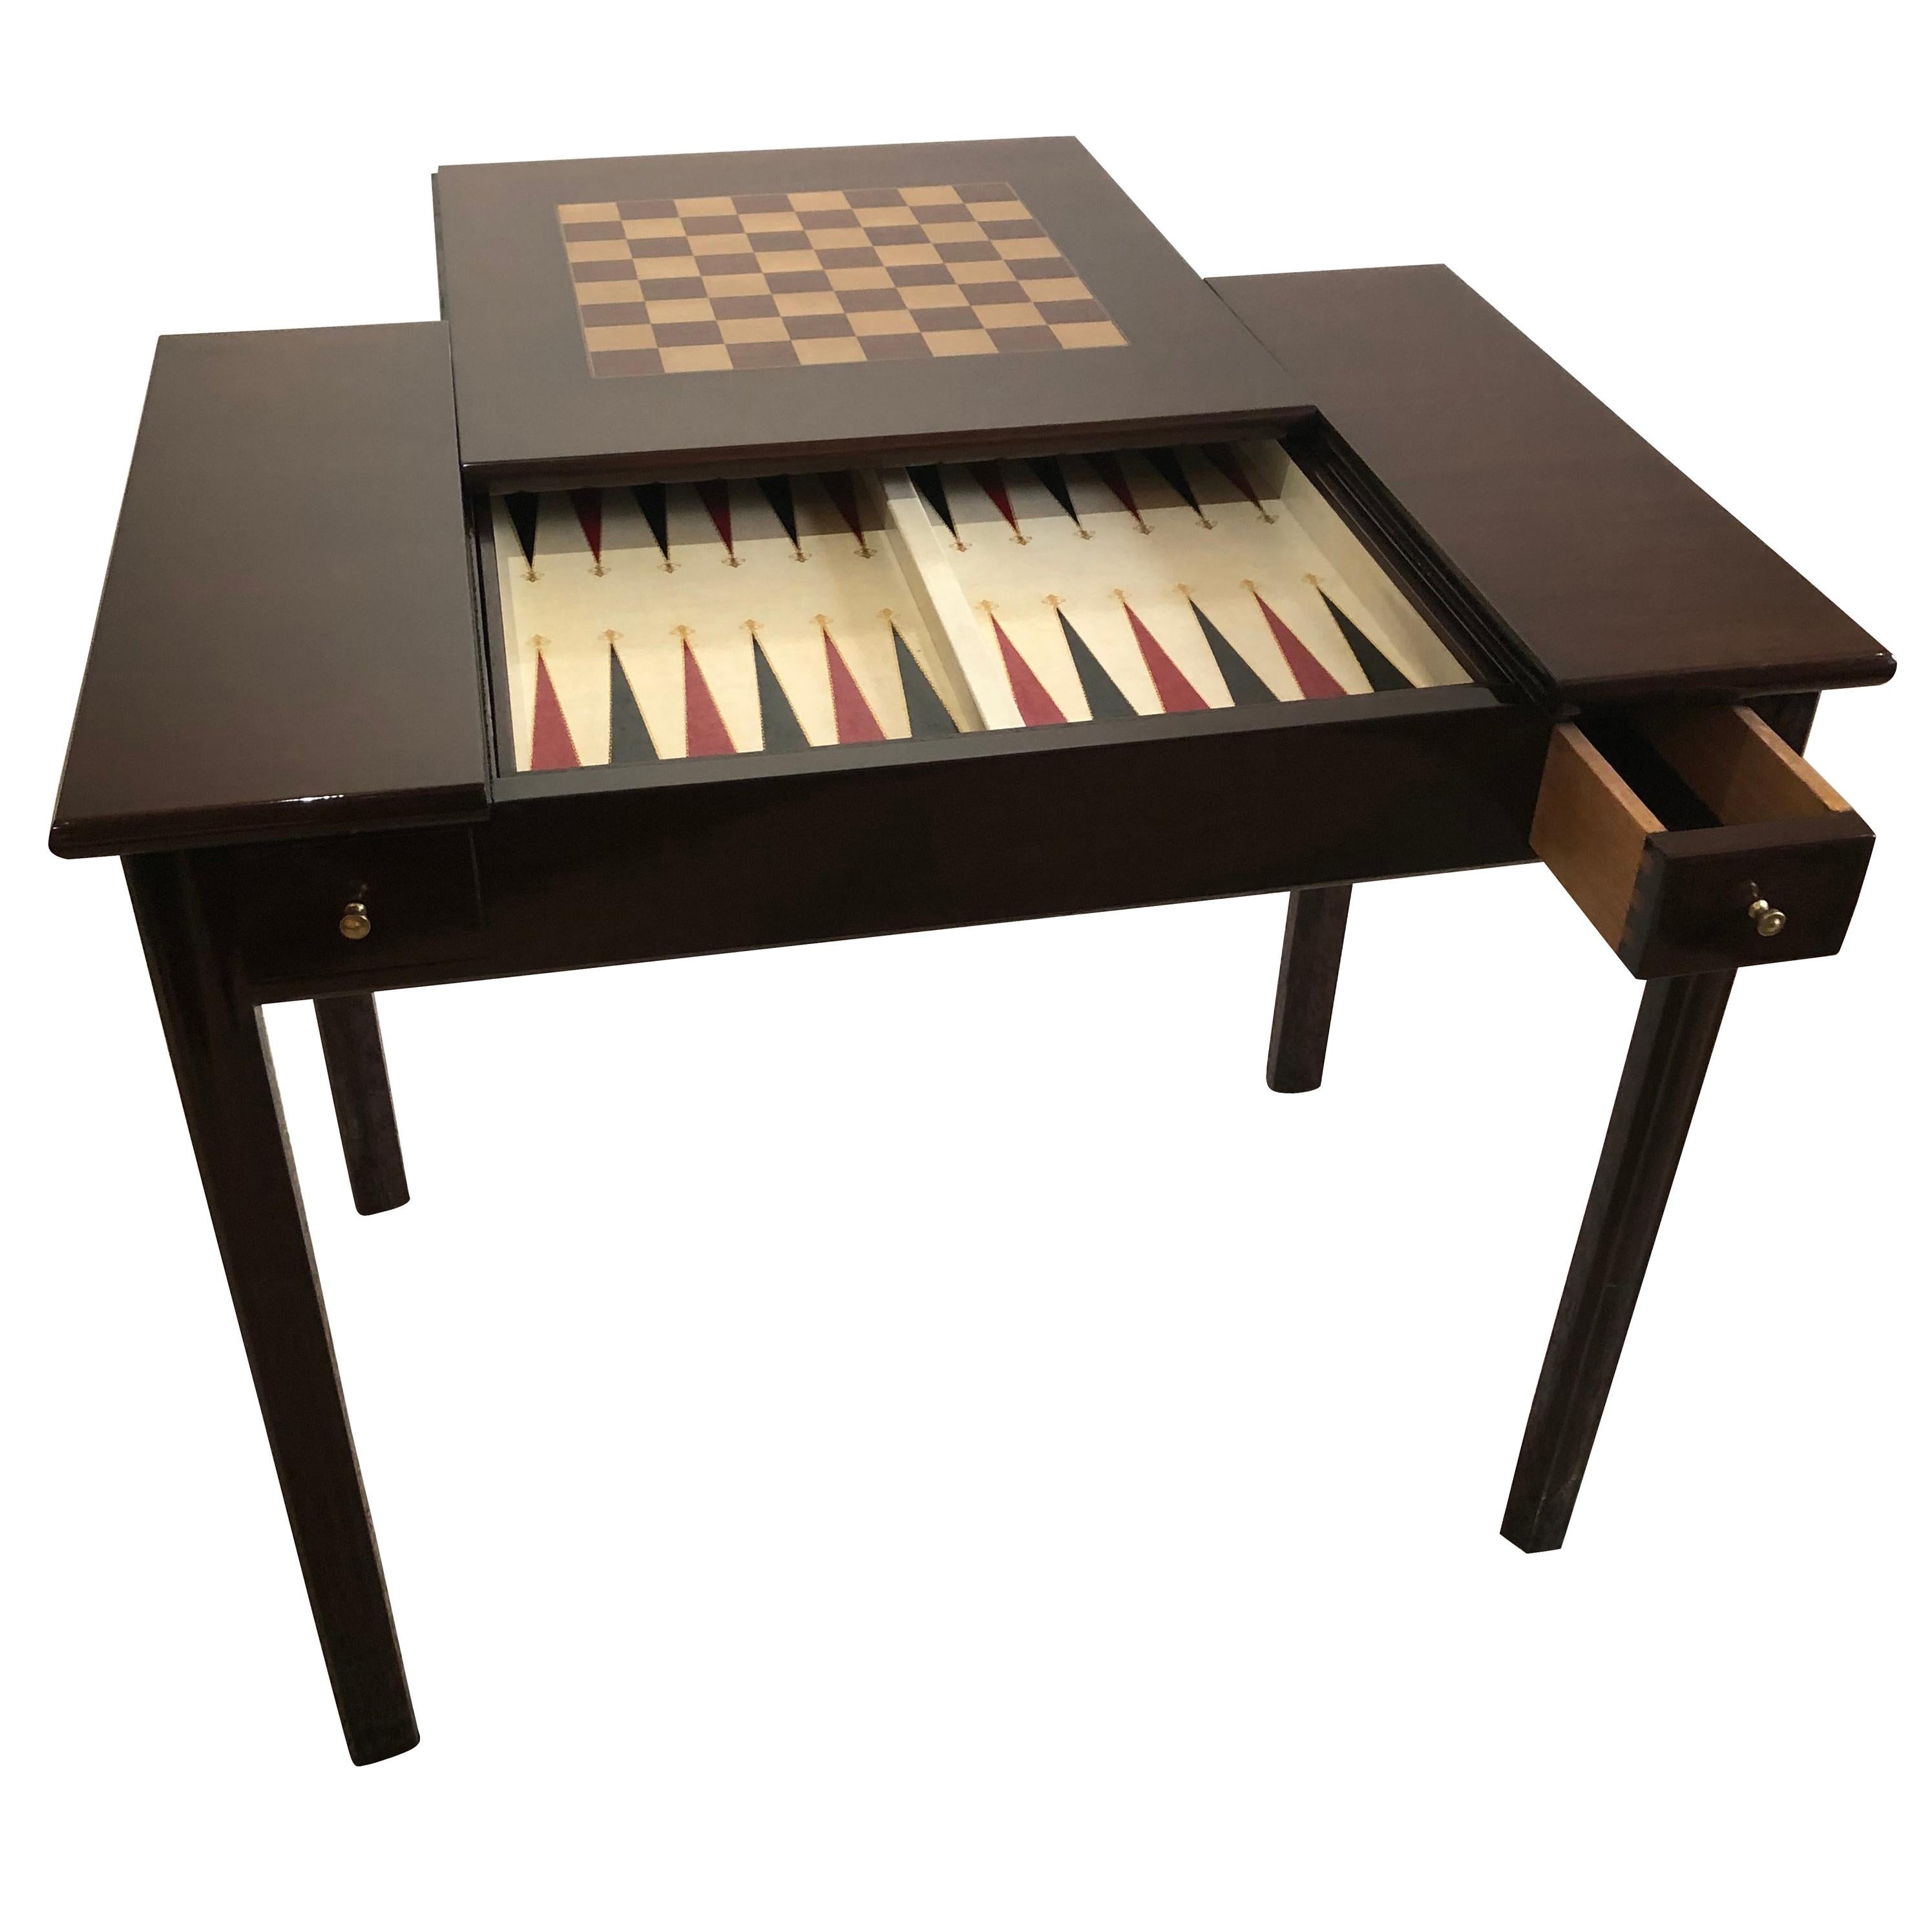 Backgammon Chess /Checkerboard Top Flip Top Game Table